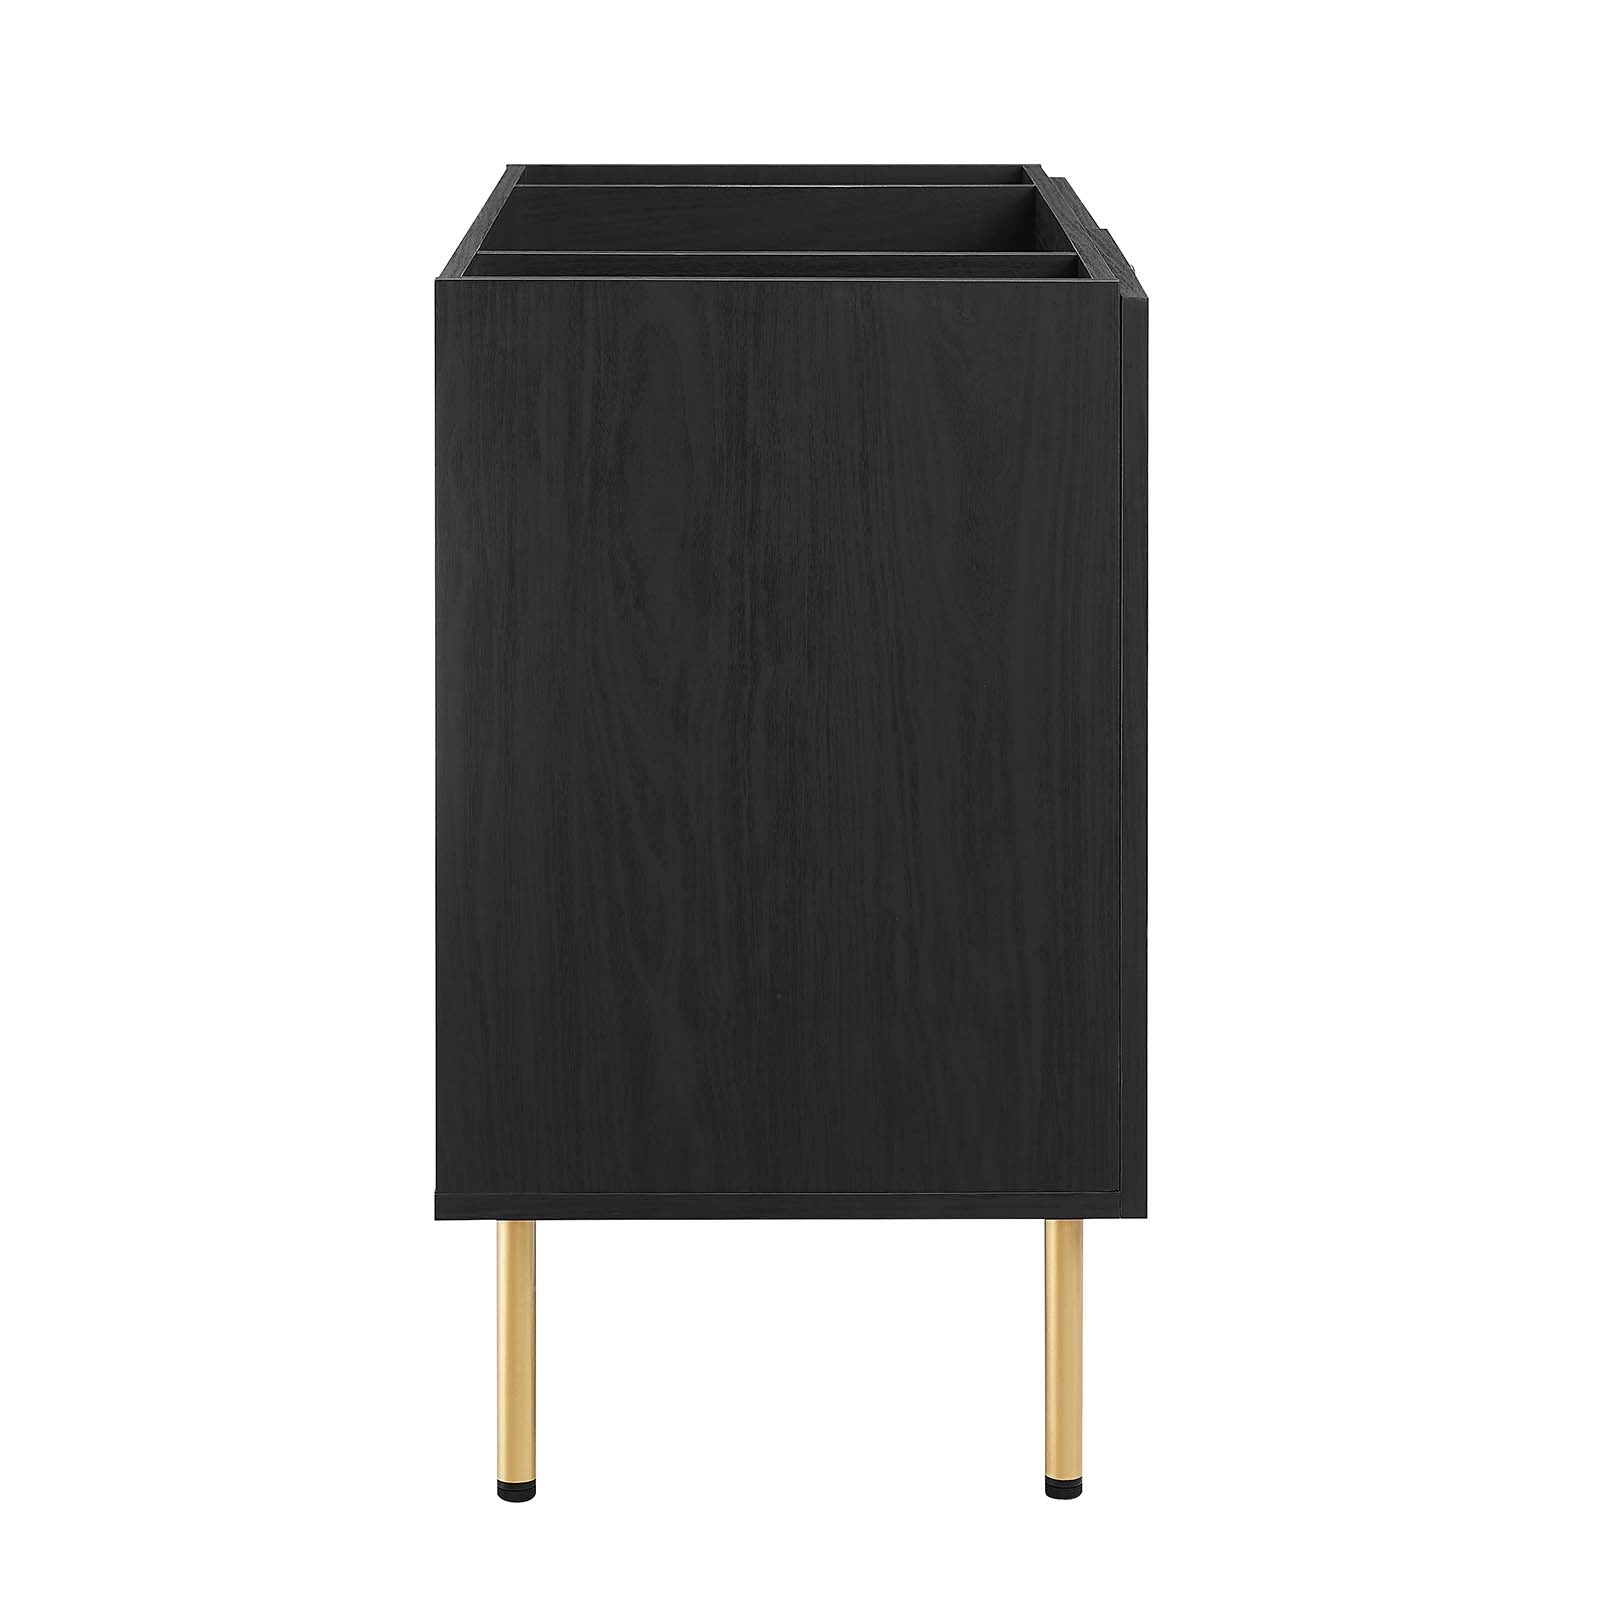 Chaucer 36" Bathroom Vanity Cabinet (Sink Basin Not Included) - East Shore Modern Home Furnishings